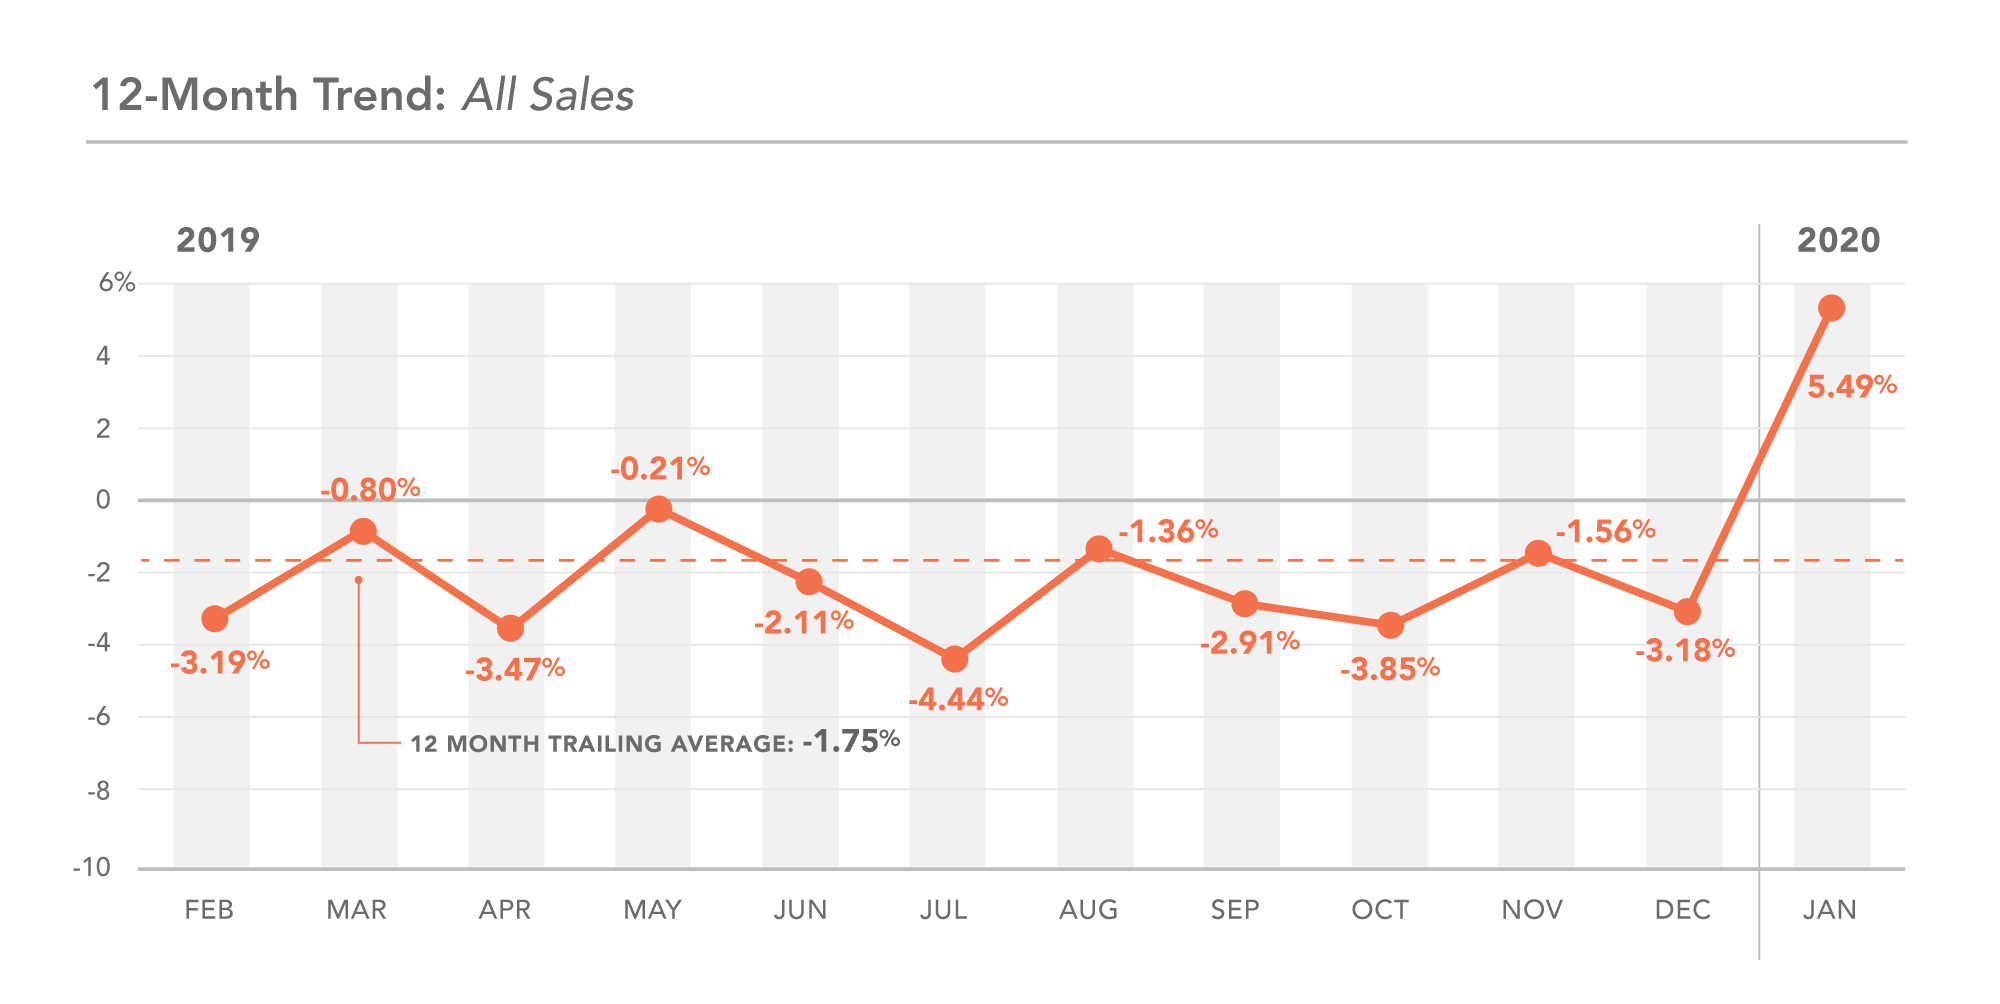 DC 12-month trend, all sales